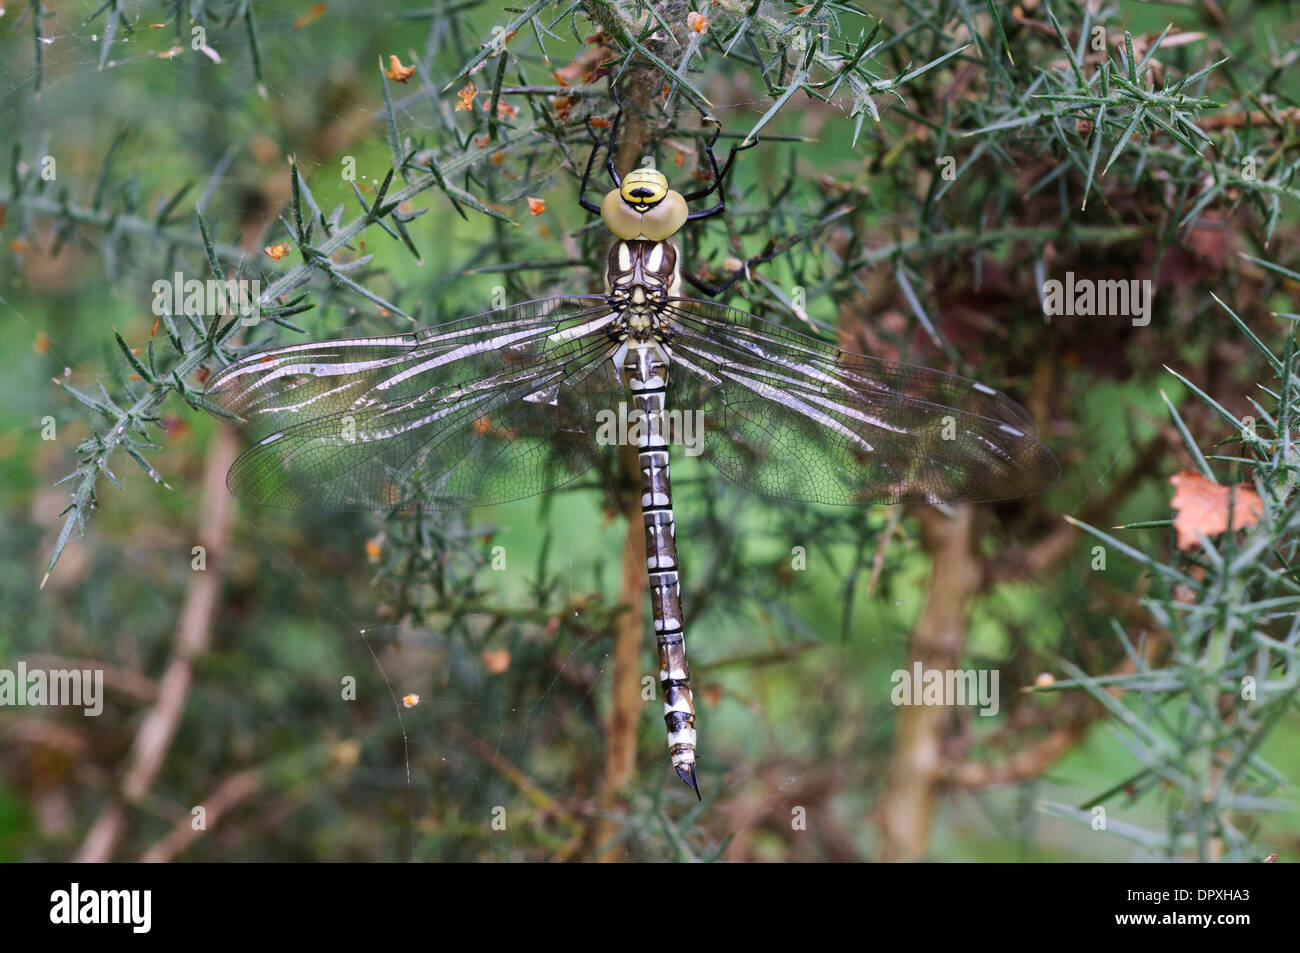 Southern Hawker Dragonfly (Aeshna cyanea), adult female perched on gorse at Arne in Dorset. August. Stock Photo